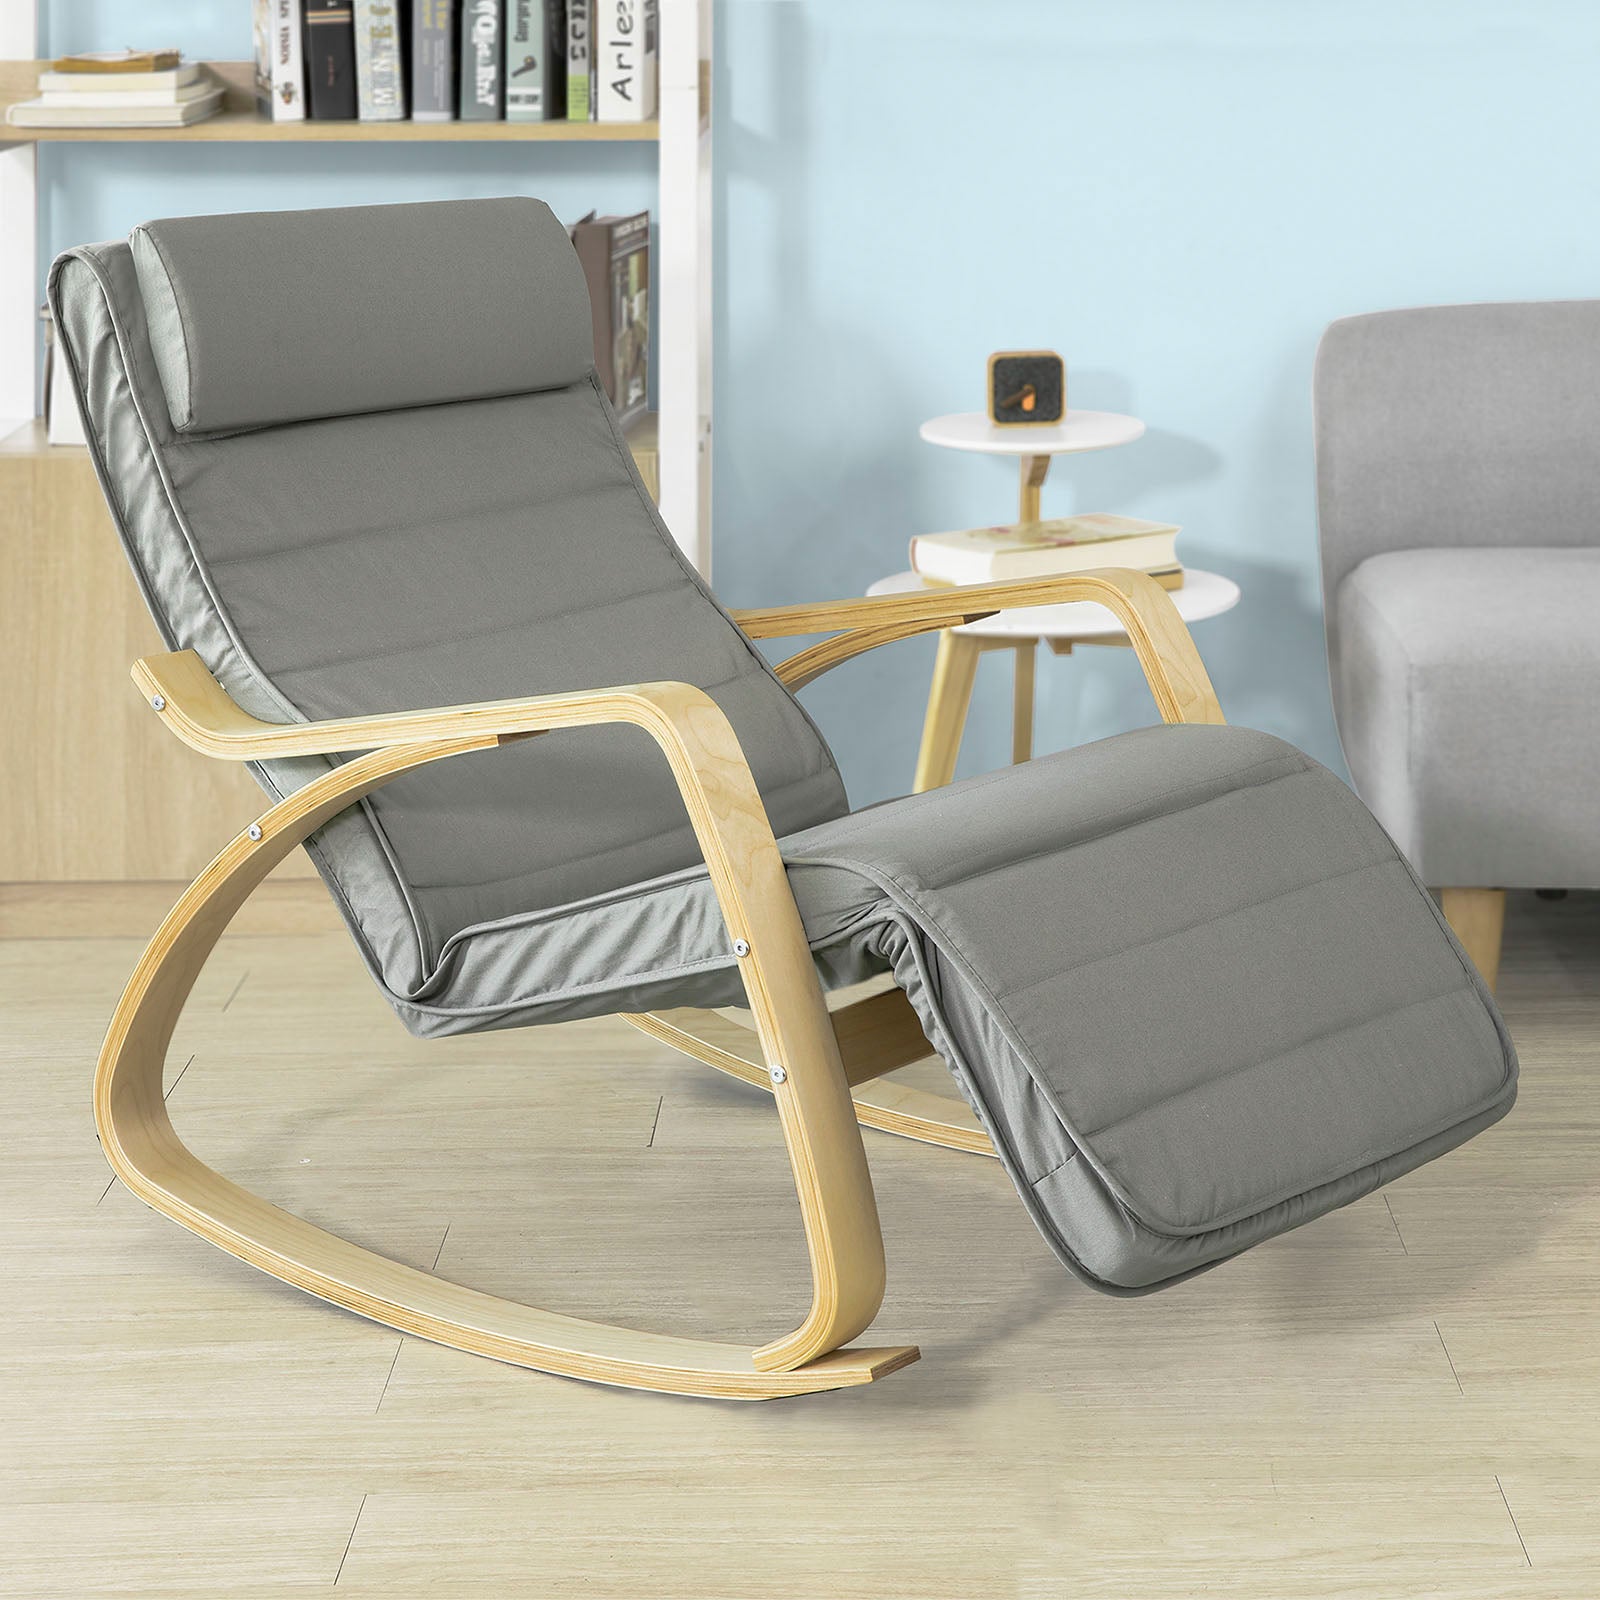 SoBuy Comfortable Relax Rocking Chair with Footrest Grey Cushion FST16-DG